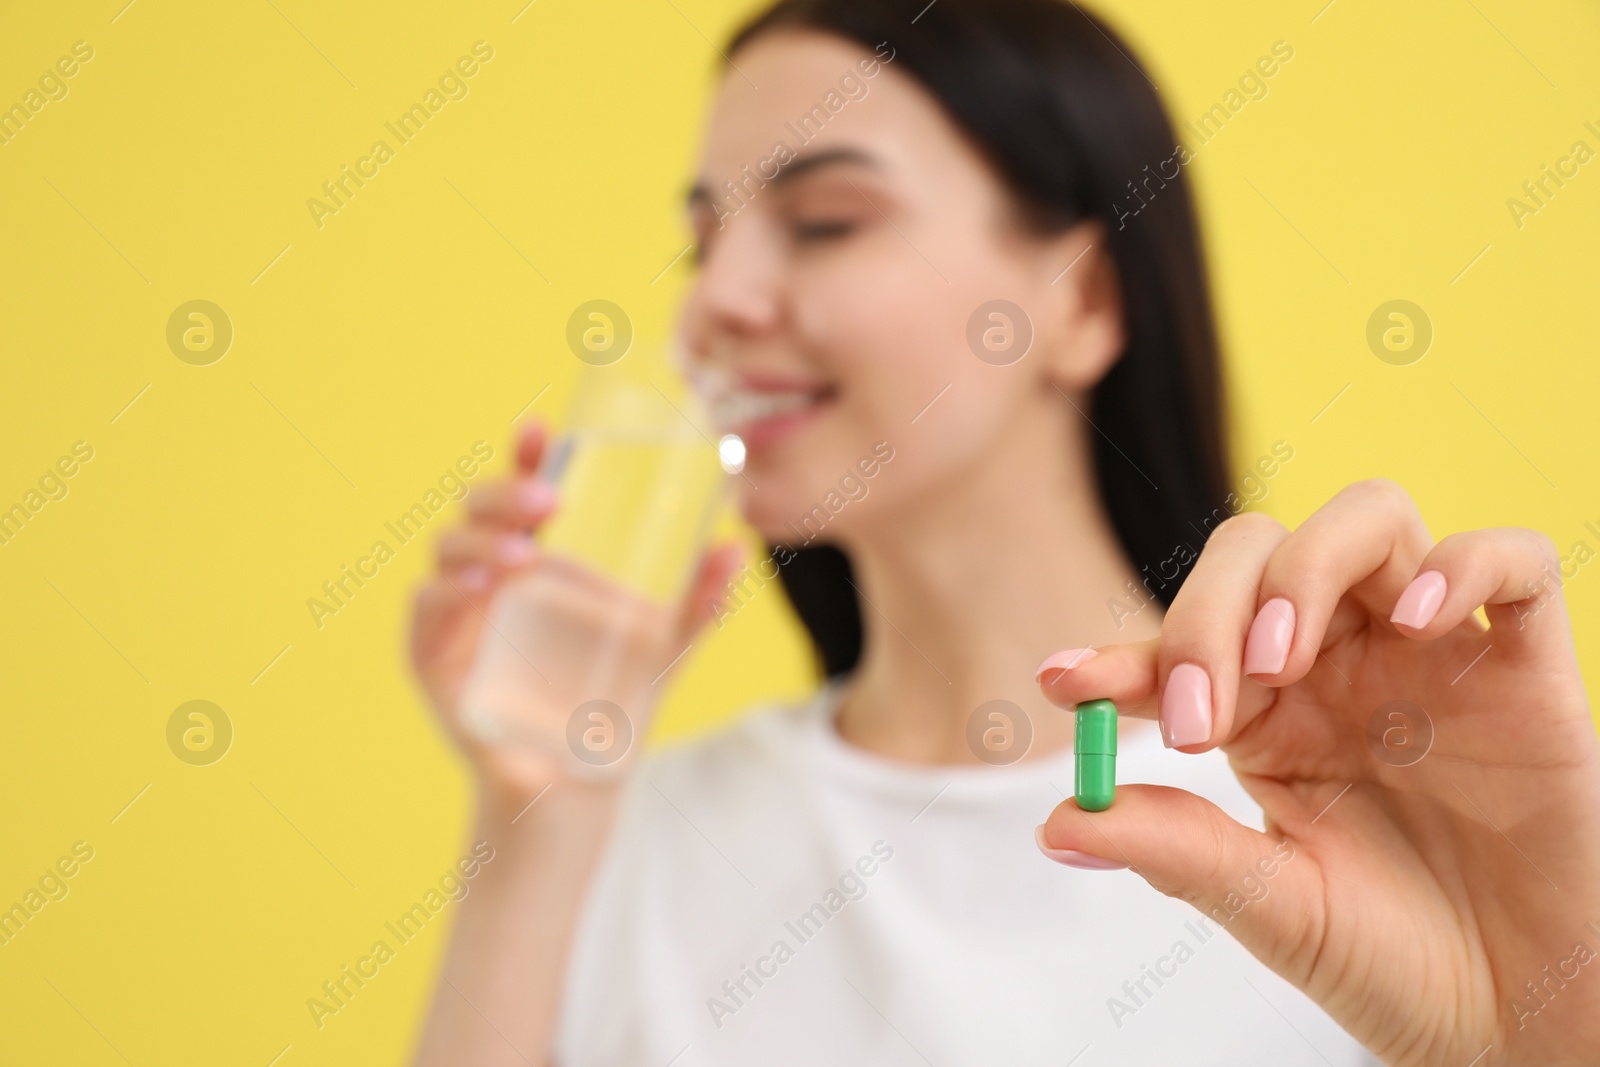 Photo of Young woman with glass of water and vitamin capsule against yellow background, focus on hand